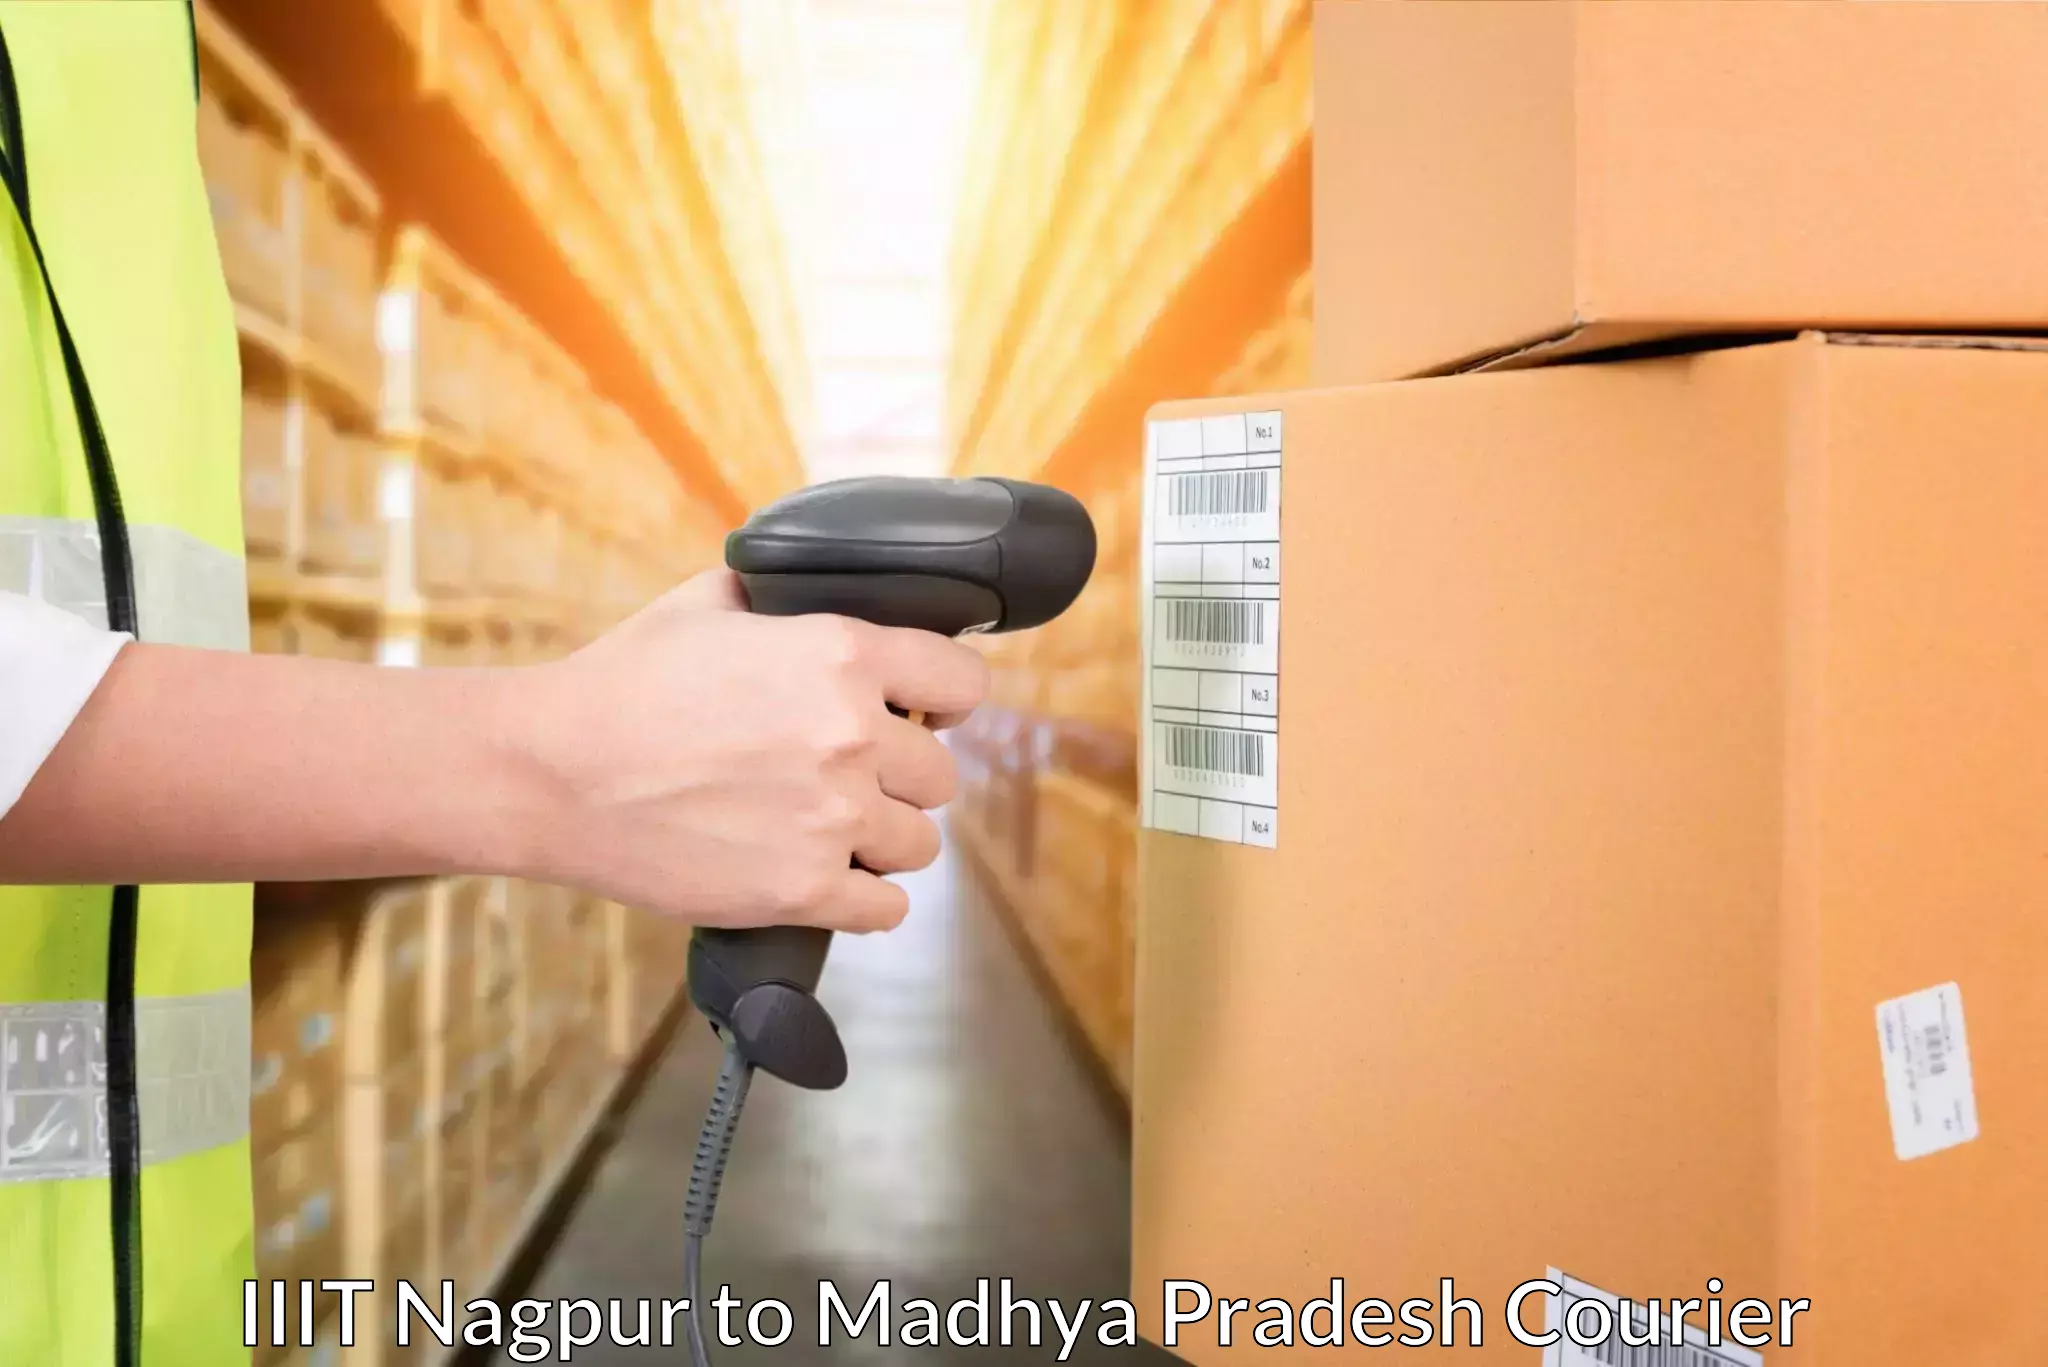 Business delivery service IIIT Nagpur to Sehore